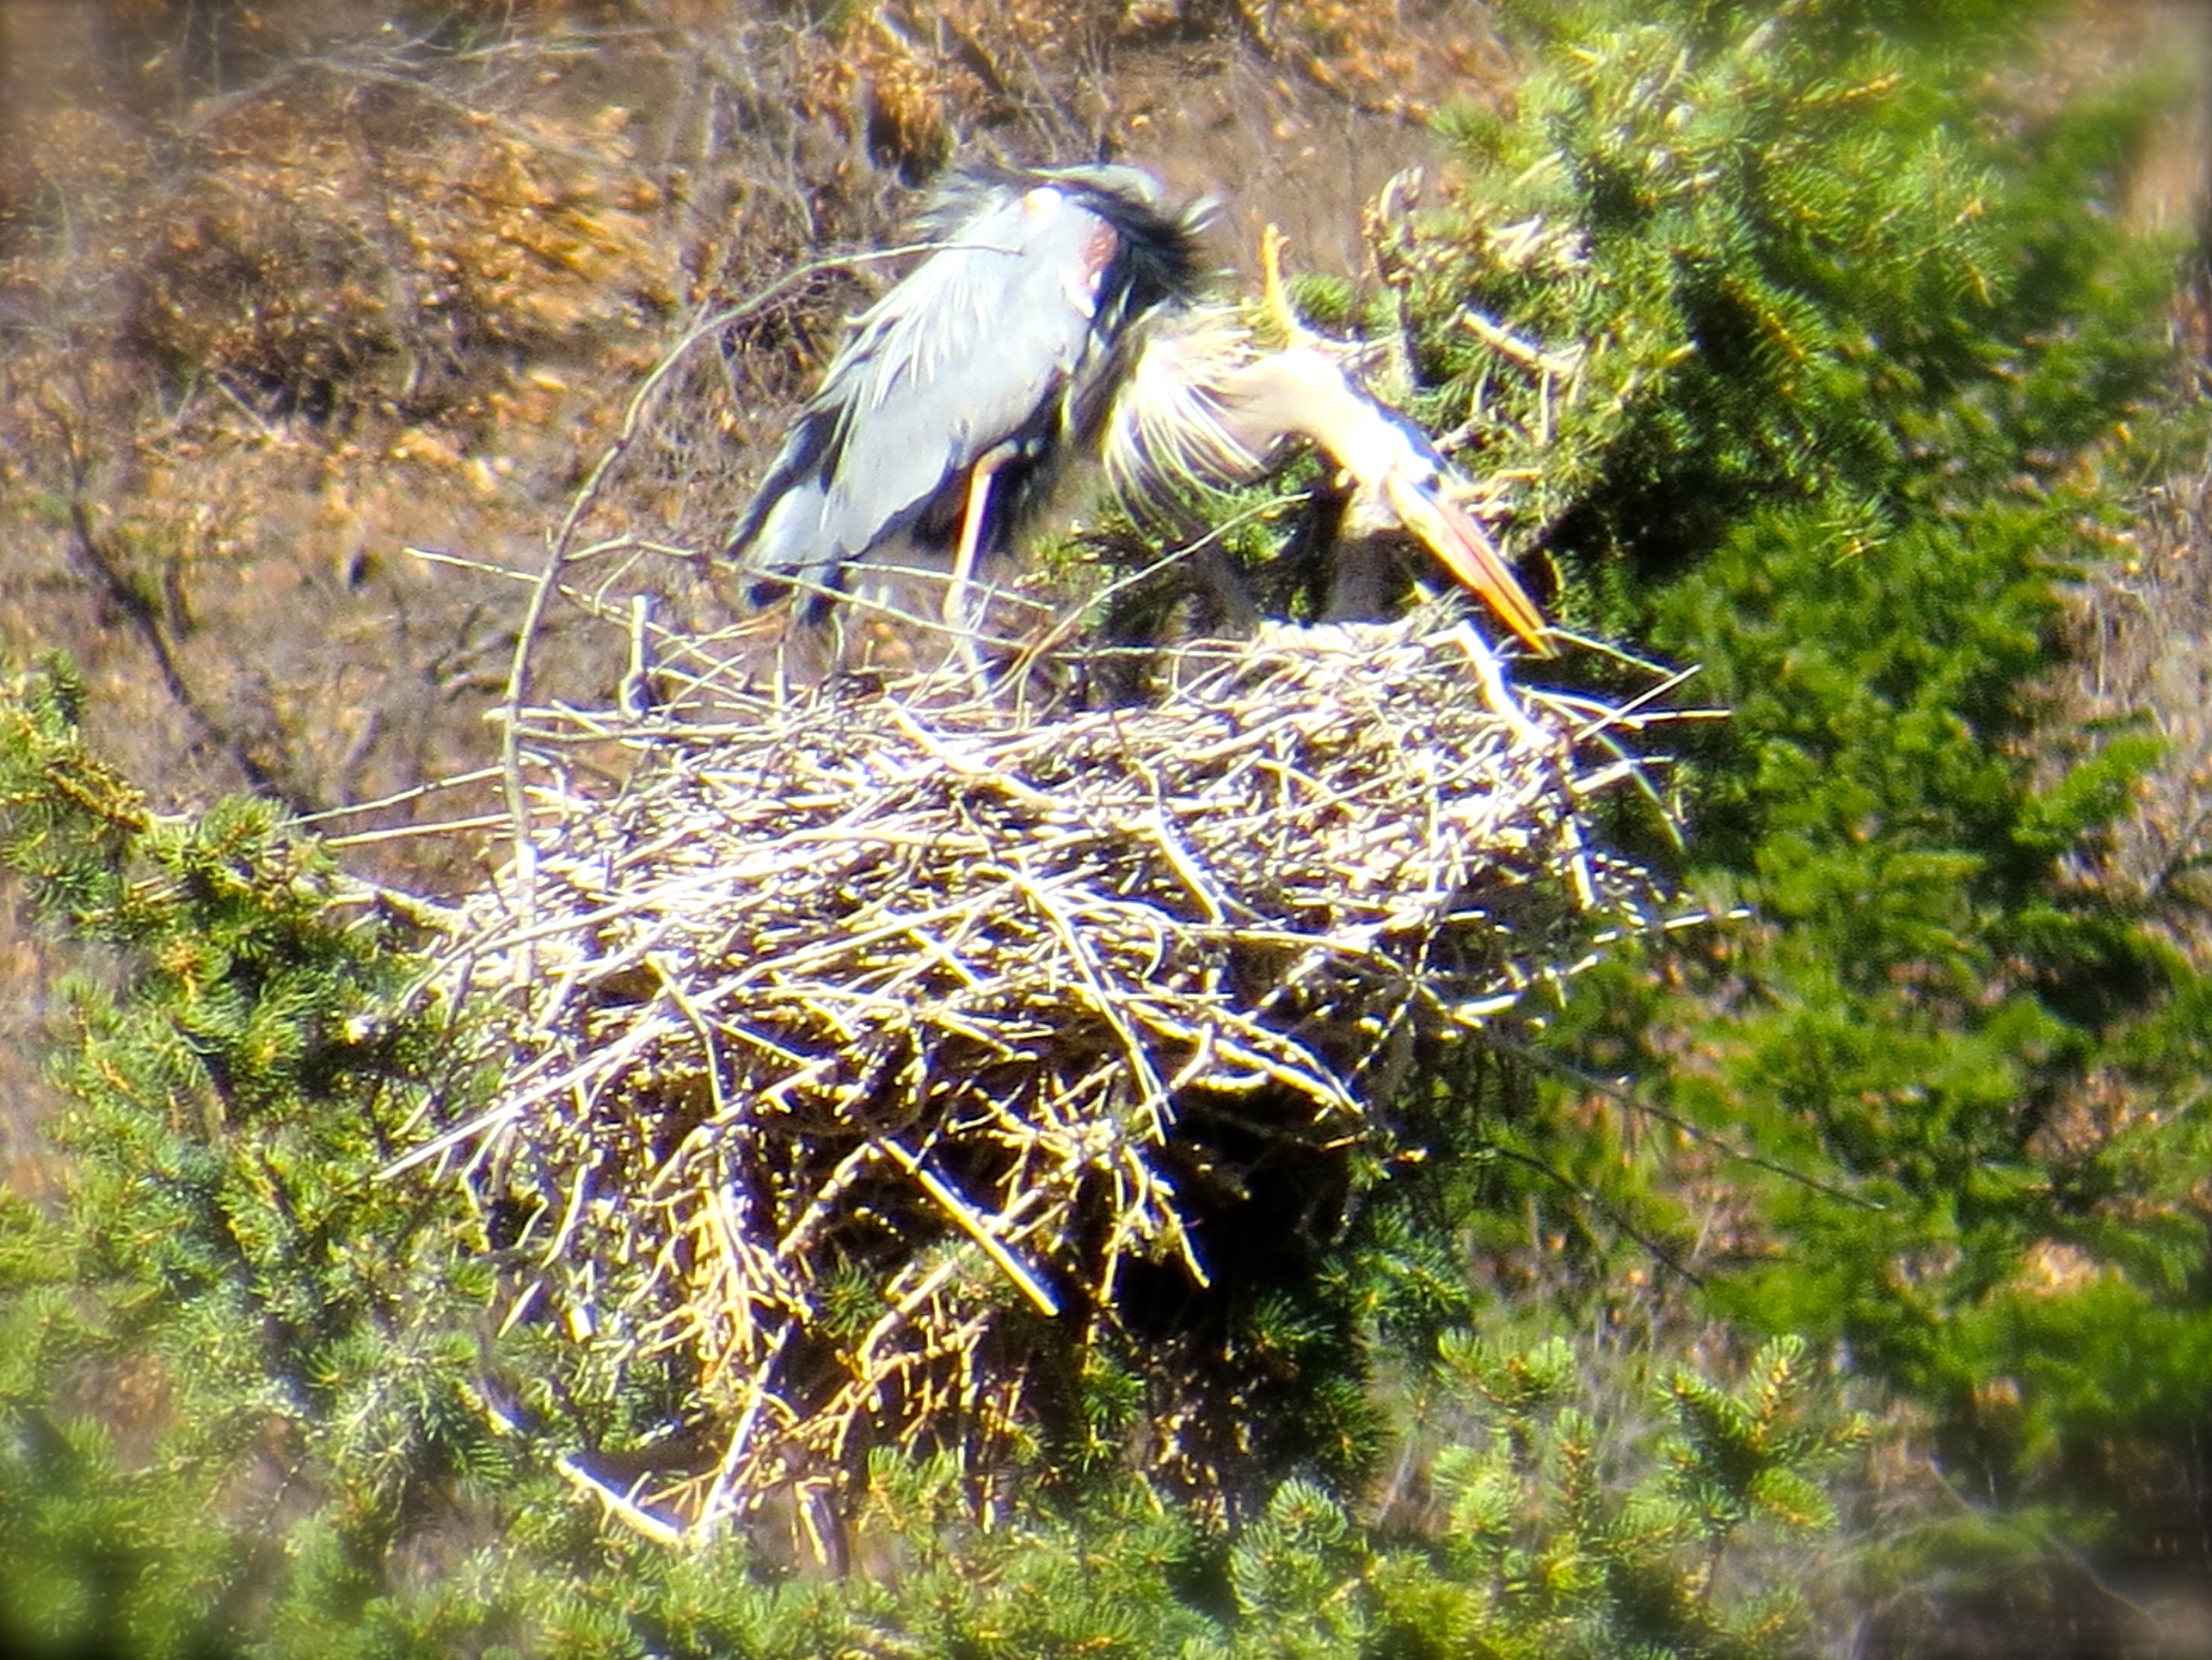 Tuesday morning I joined the Aspen Center for Environmental Studies Birdwalk. At our North Star Preserve we observed a Heron Rookery with 5 active nests. This Rookery , located in conifers, is the highest in Colorado. 